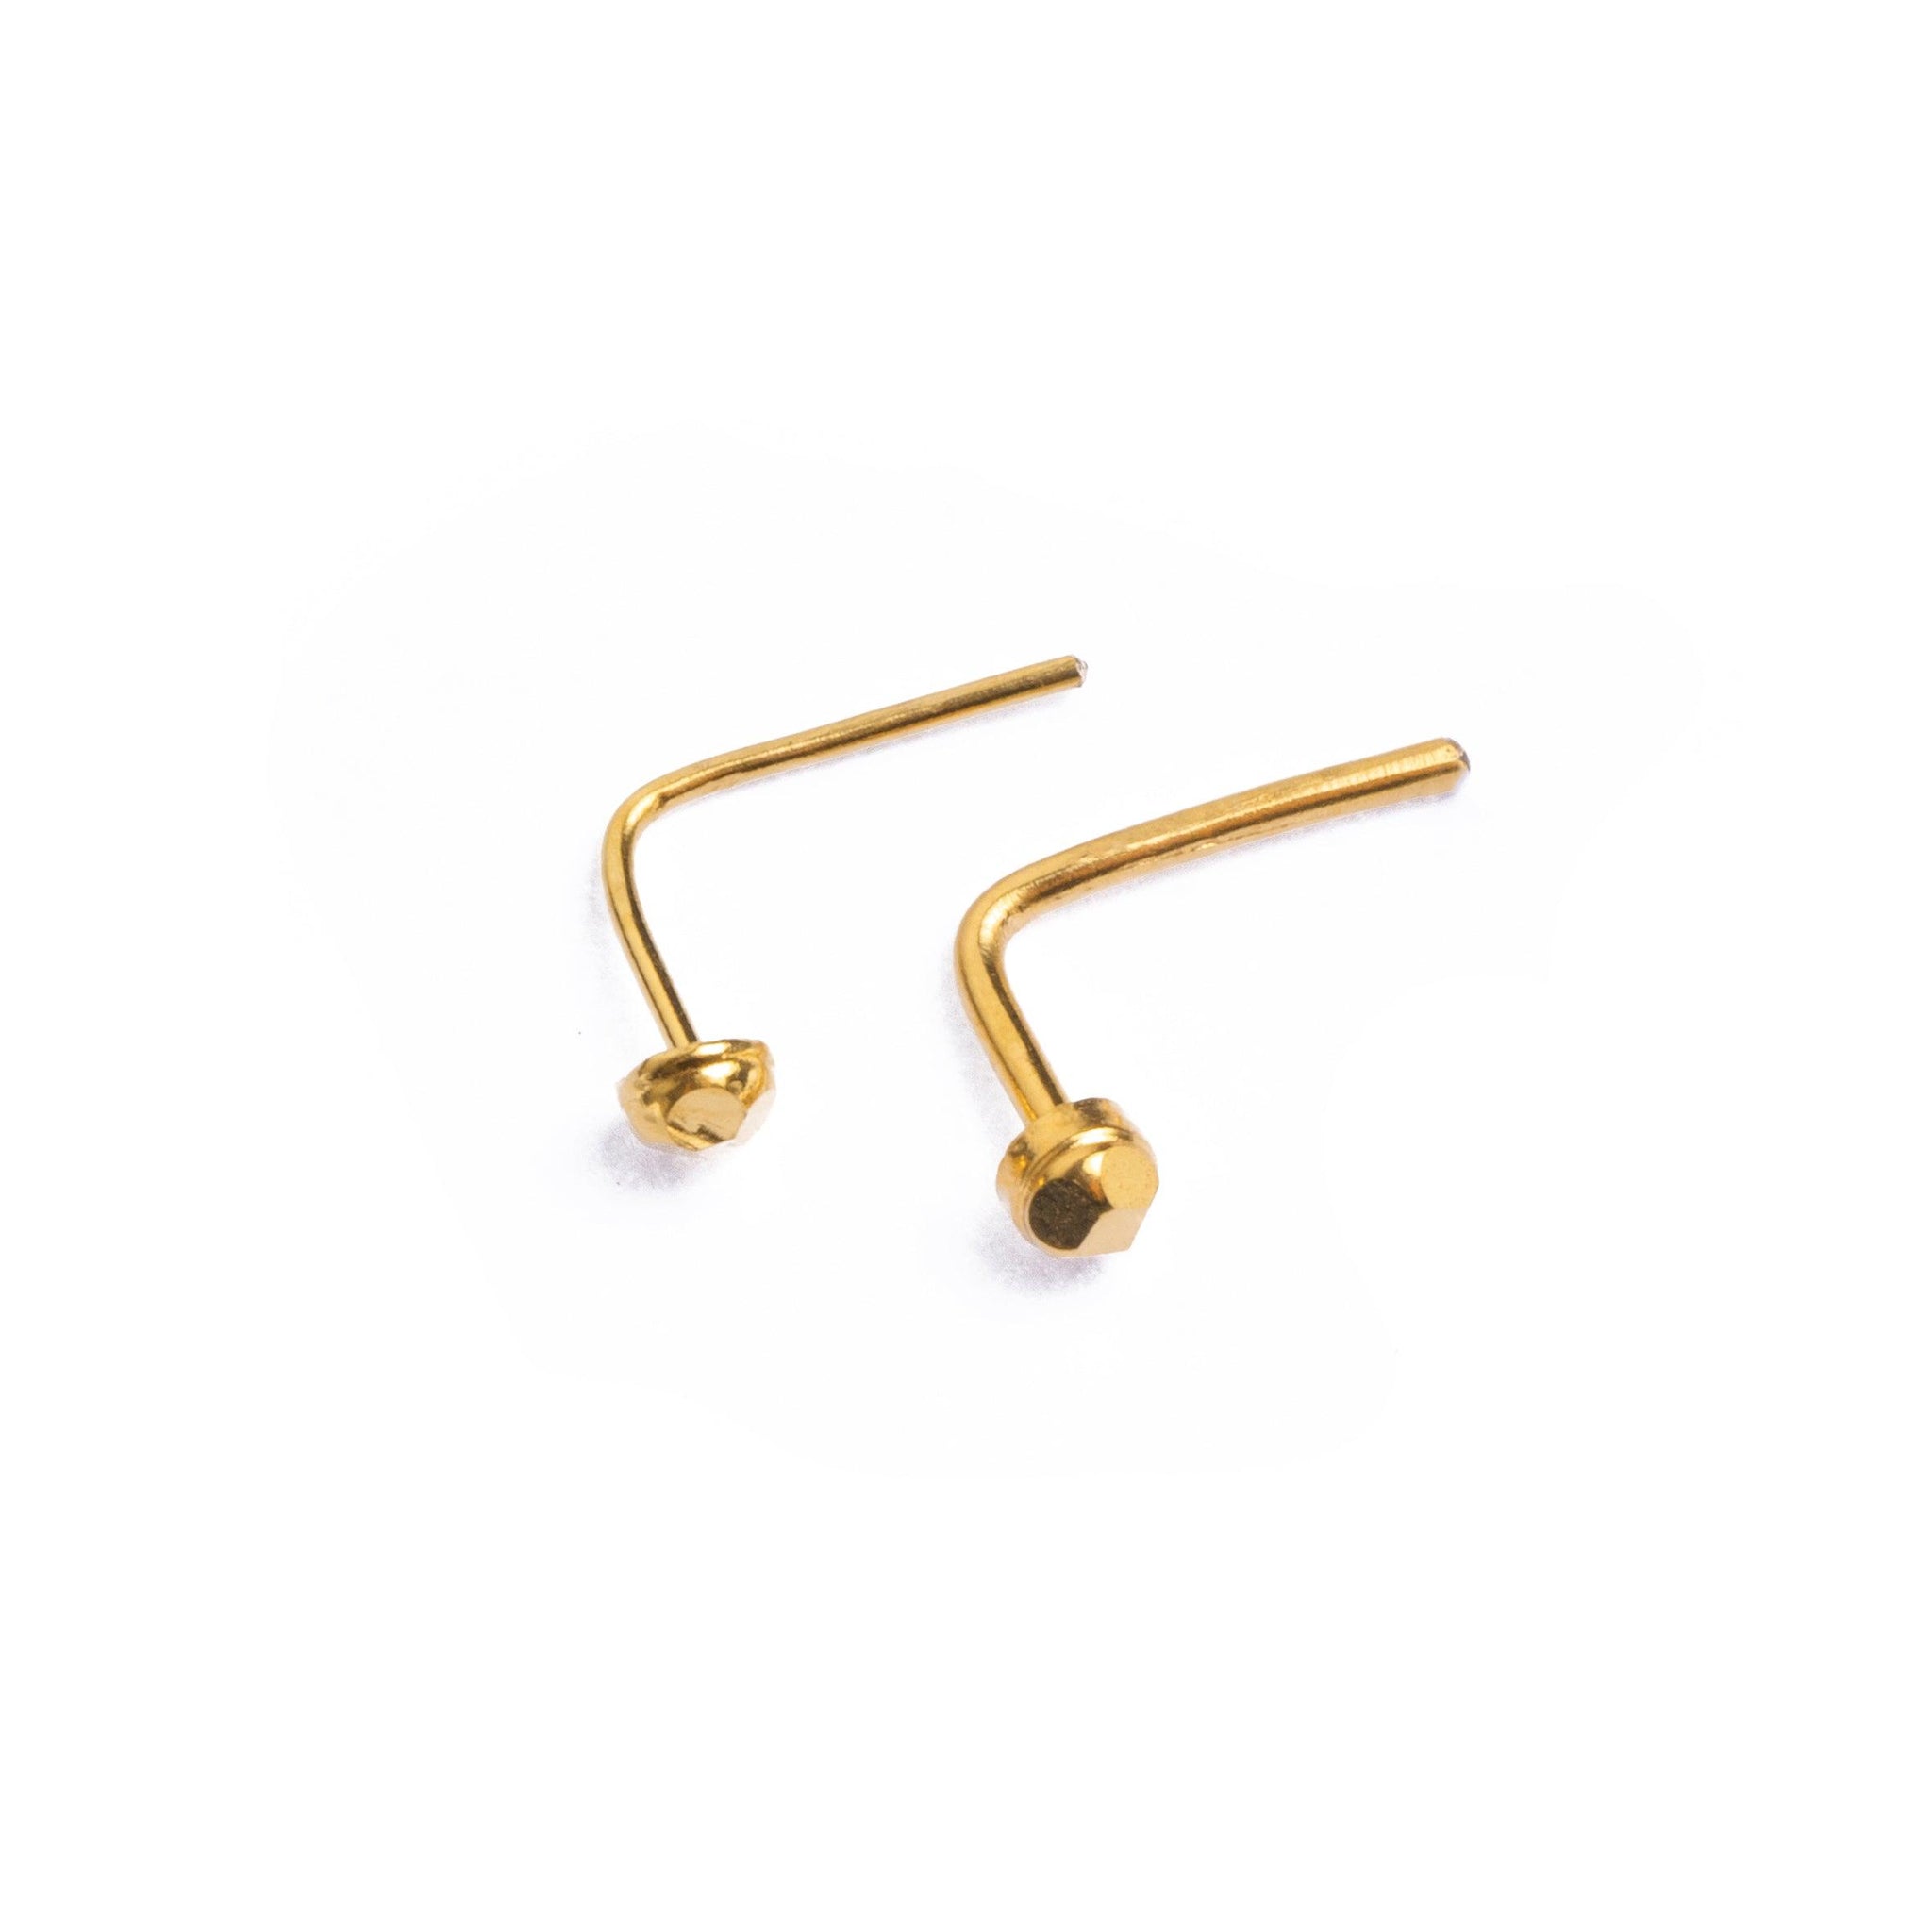 18ct Yellow Gold Nose Stud with L-Shape Back NS-2954a